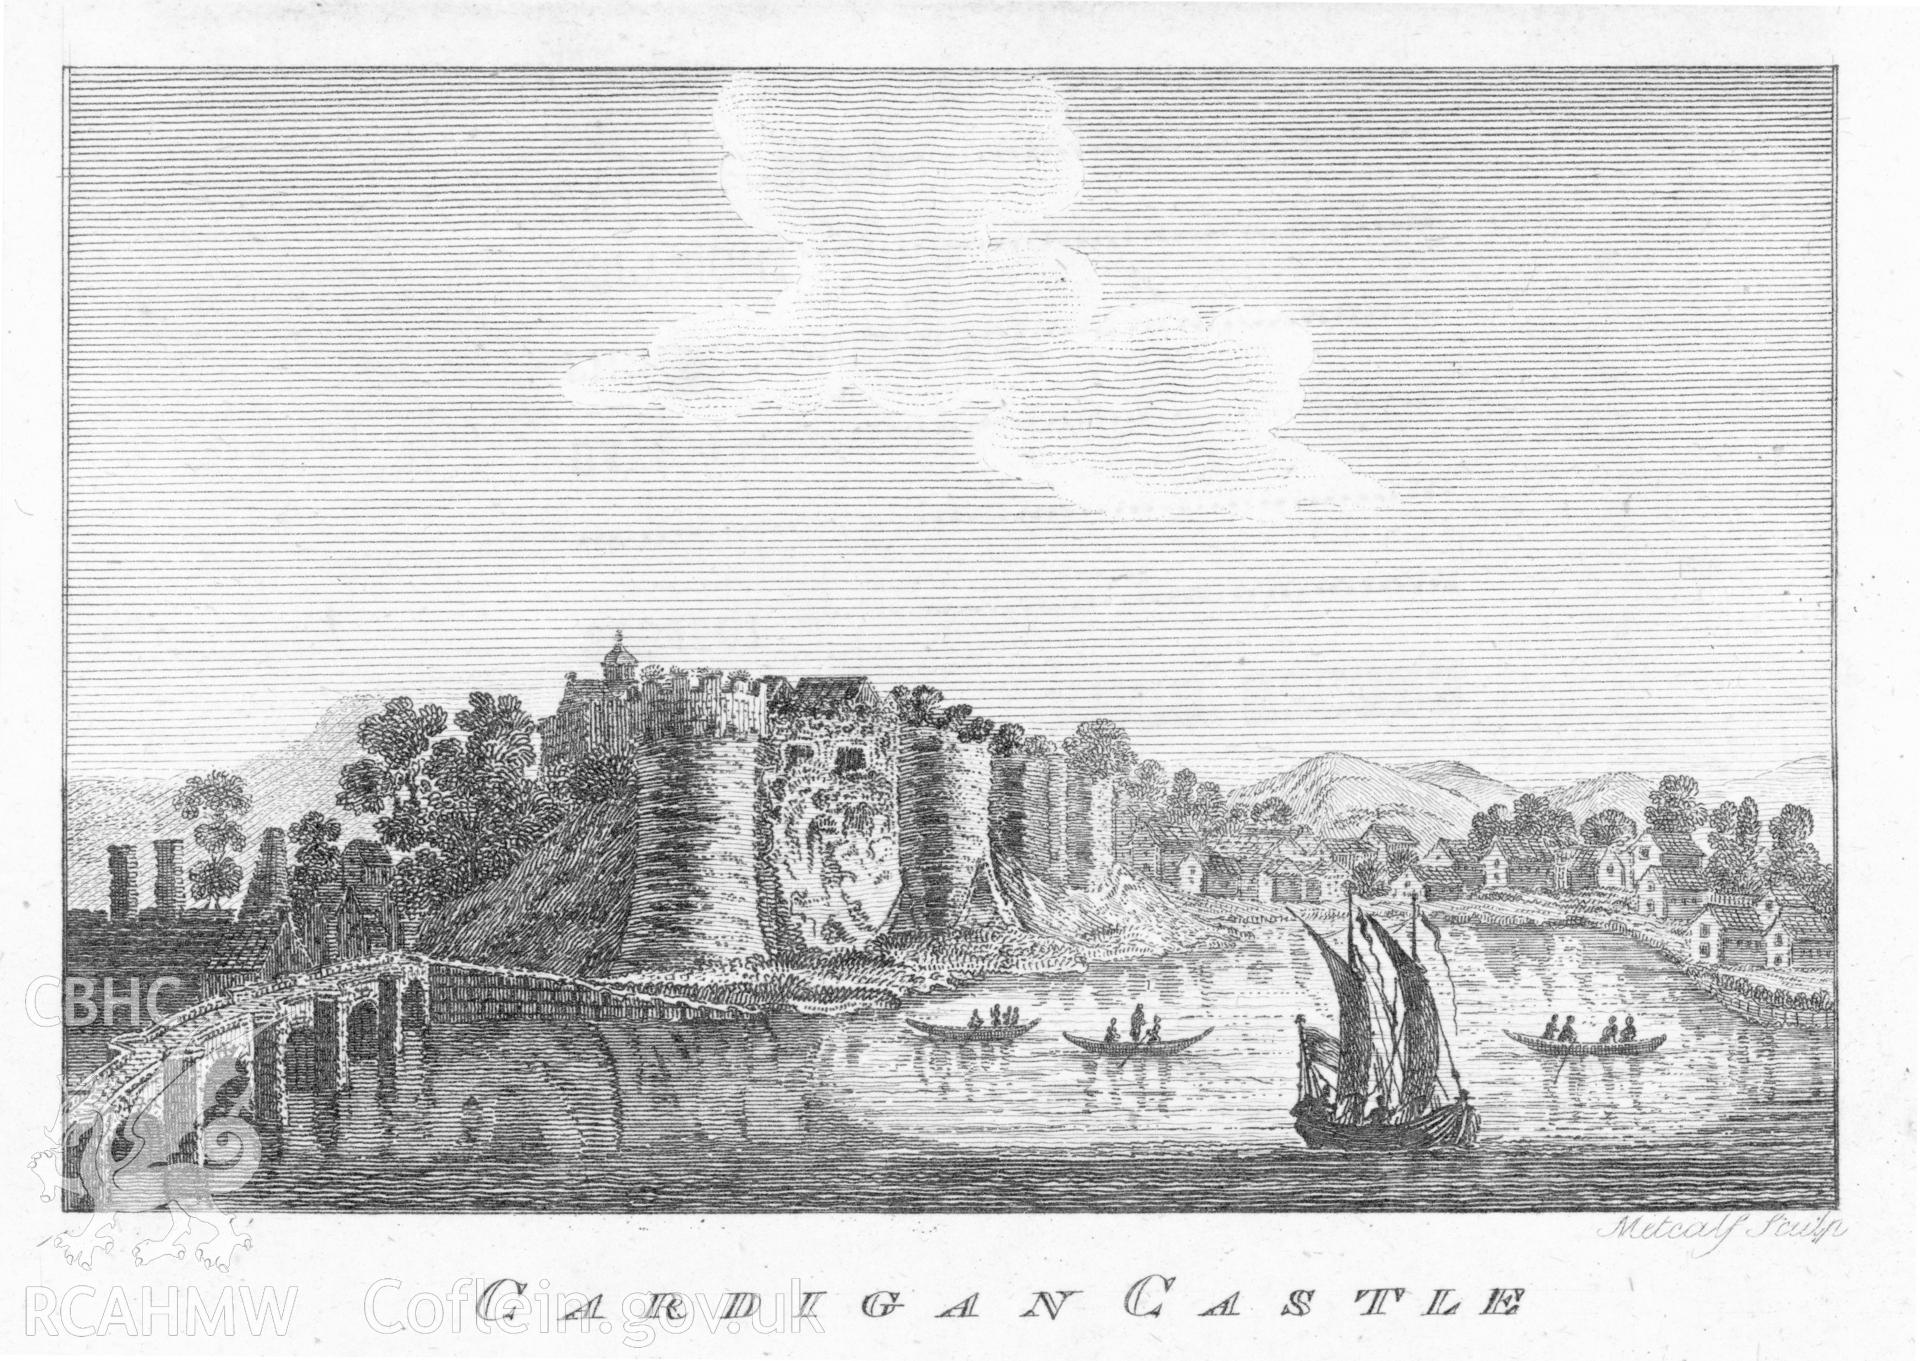 A undated black and white copy of an etching by Metcalf, showing Cardigan Castle with the bridge and sailing ship in the foreground.